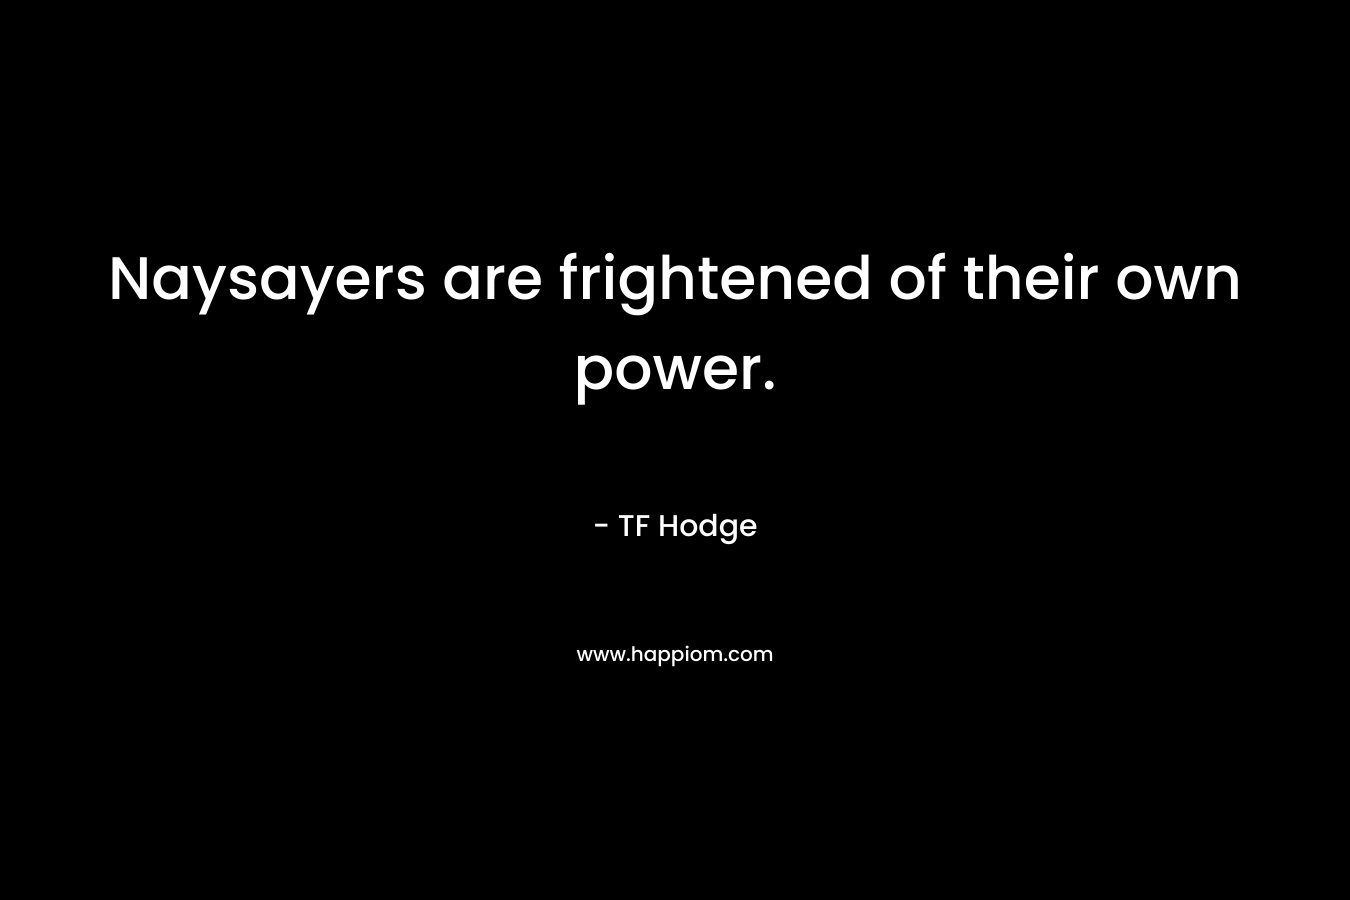 Naysayers are frightened of their own power.